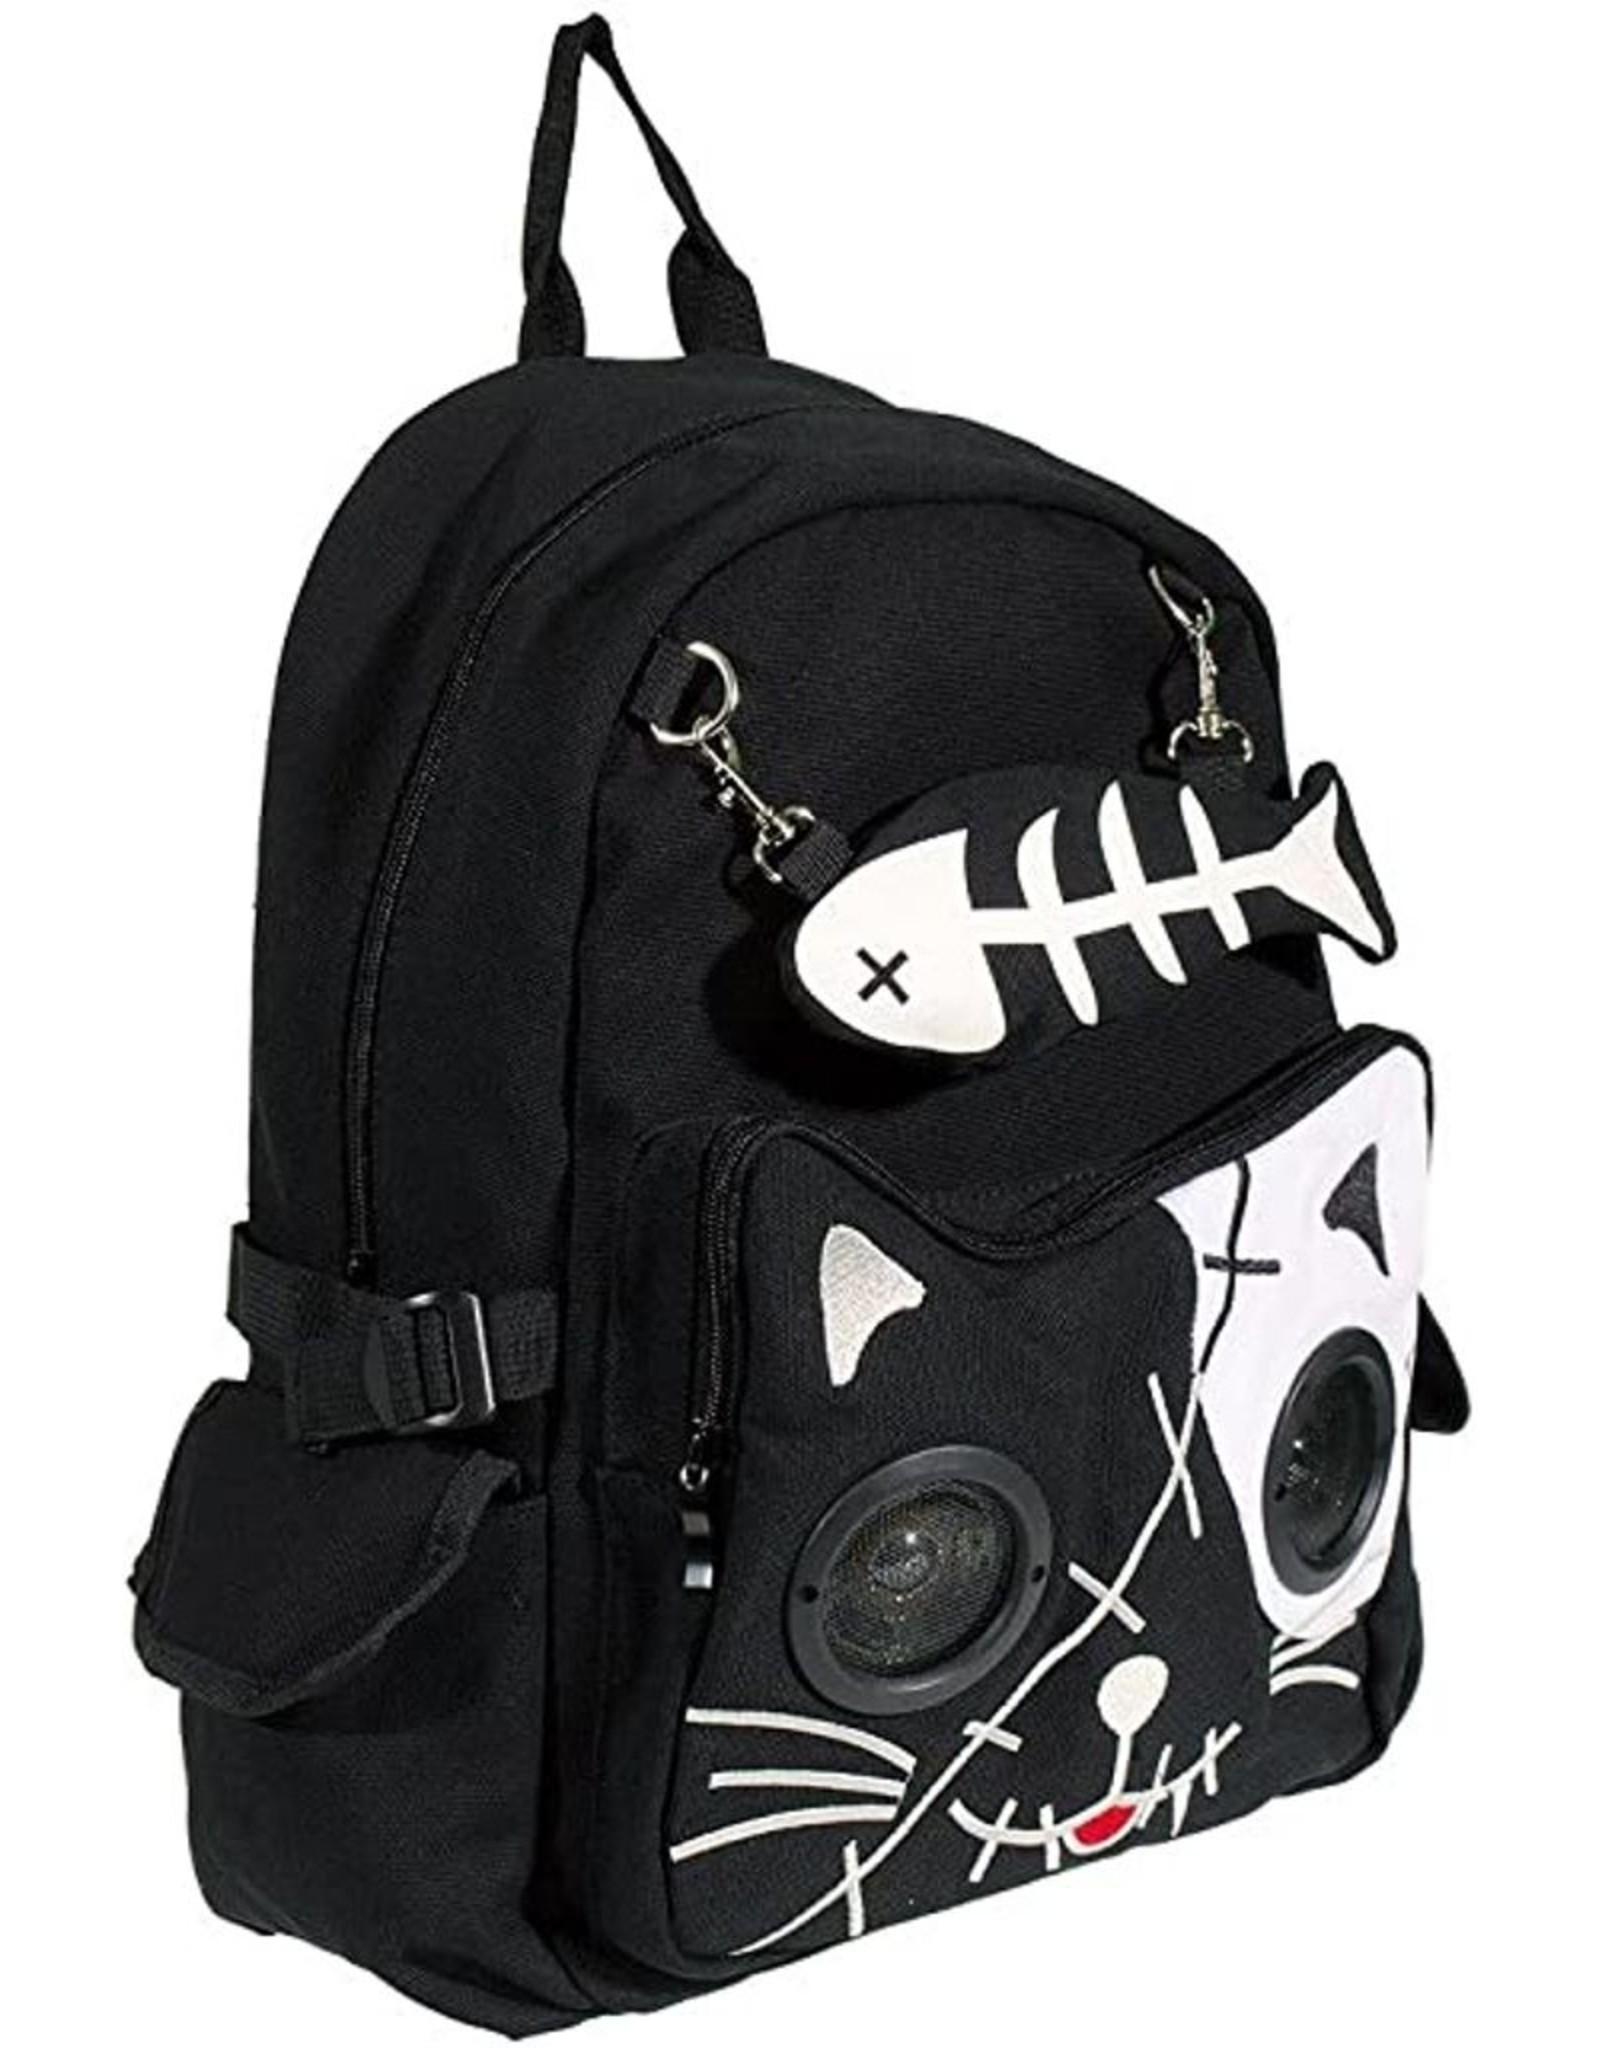 Banned Backpacks - Banned Kitty Backpack with Speakers Black-White